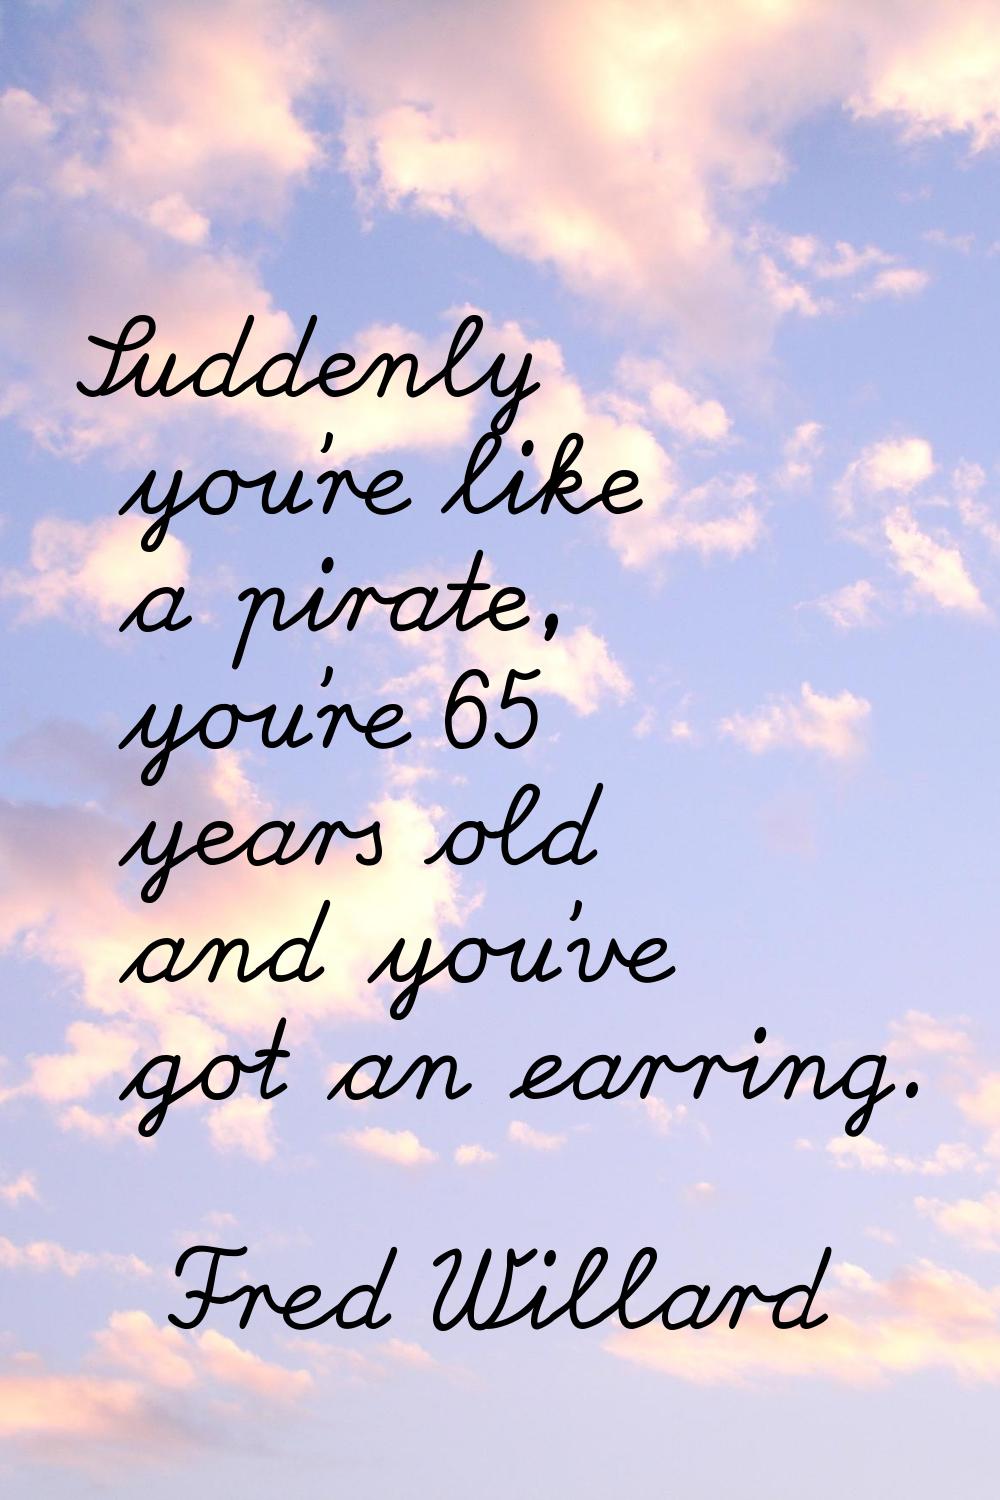 Suddenly you're like a pirate, you're 65 years old and you've got an earring.